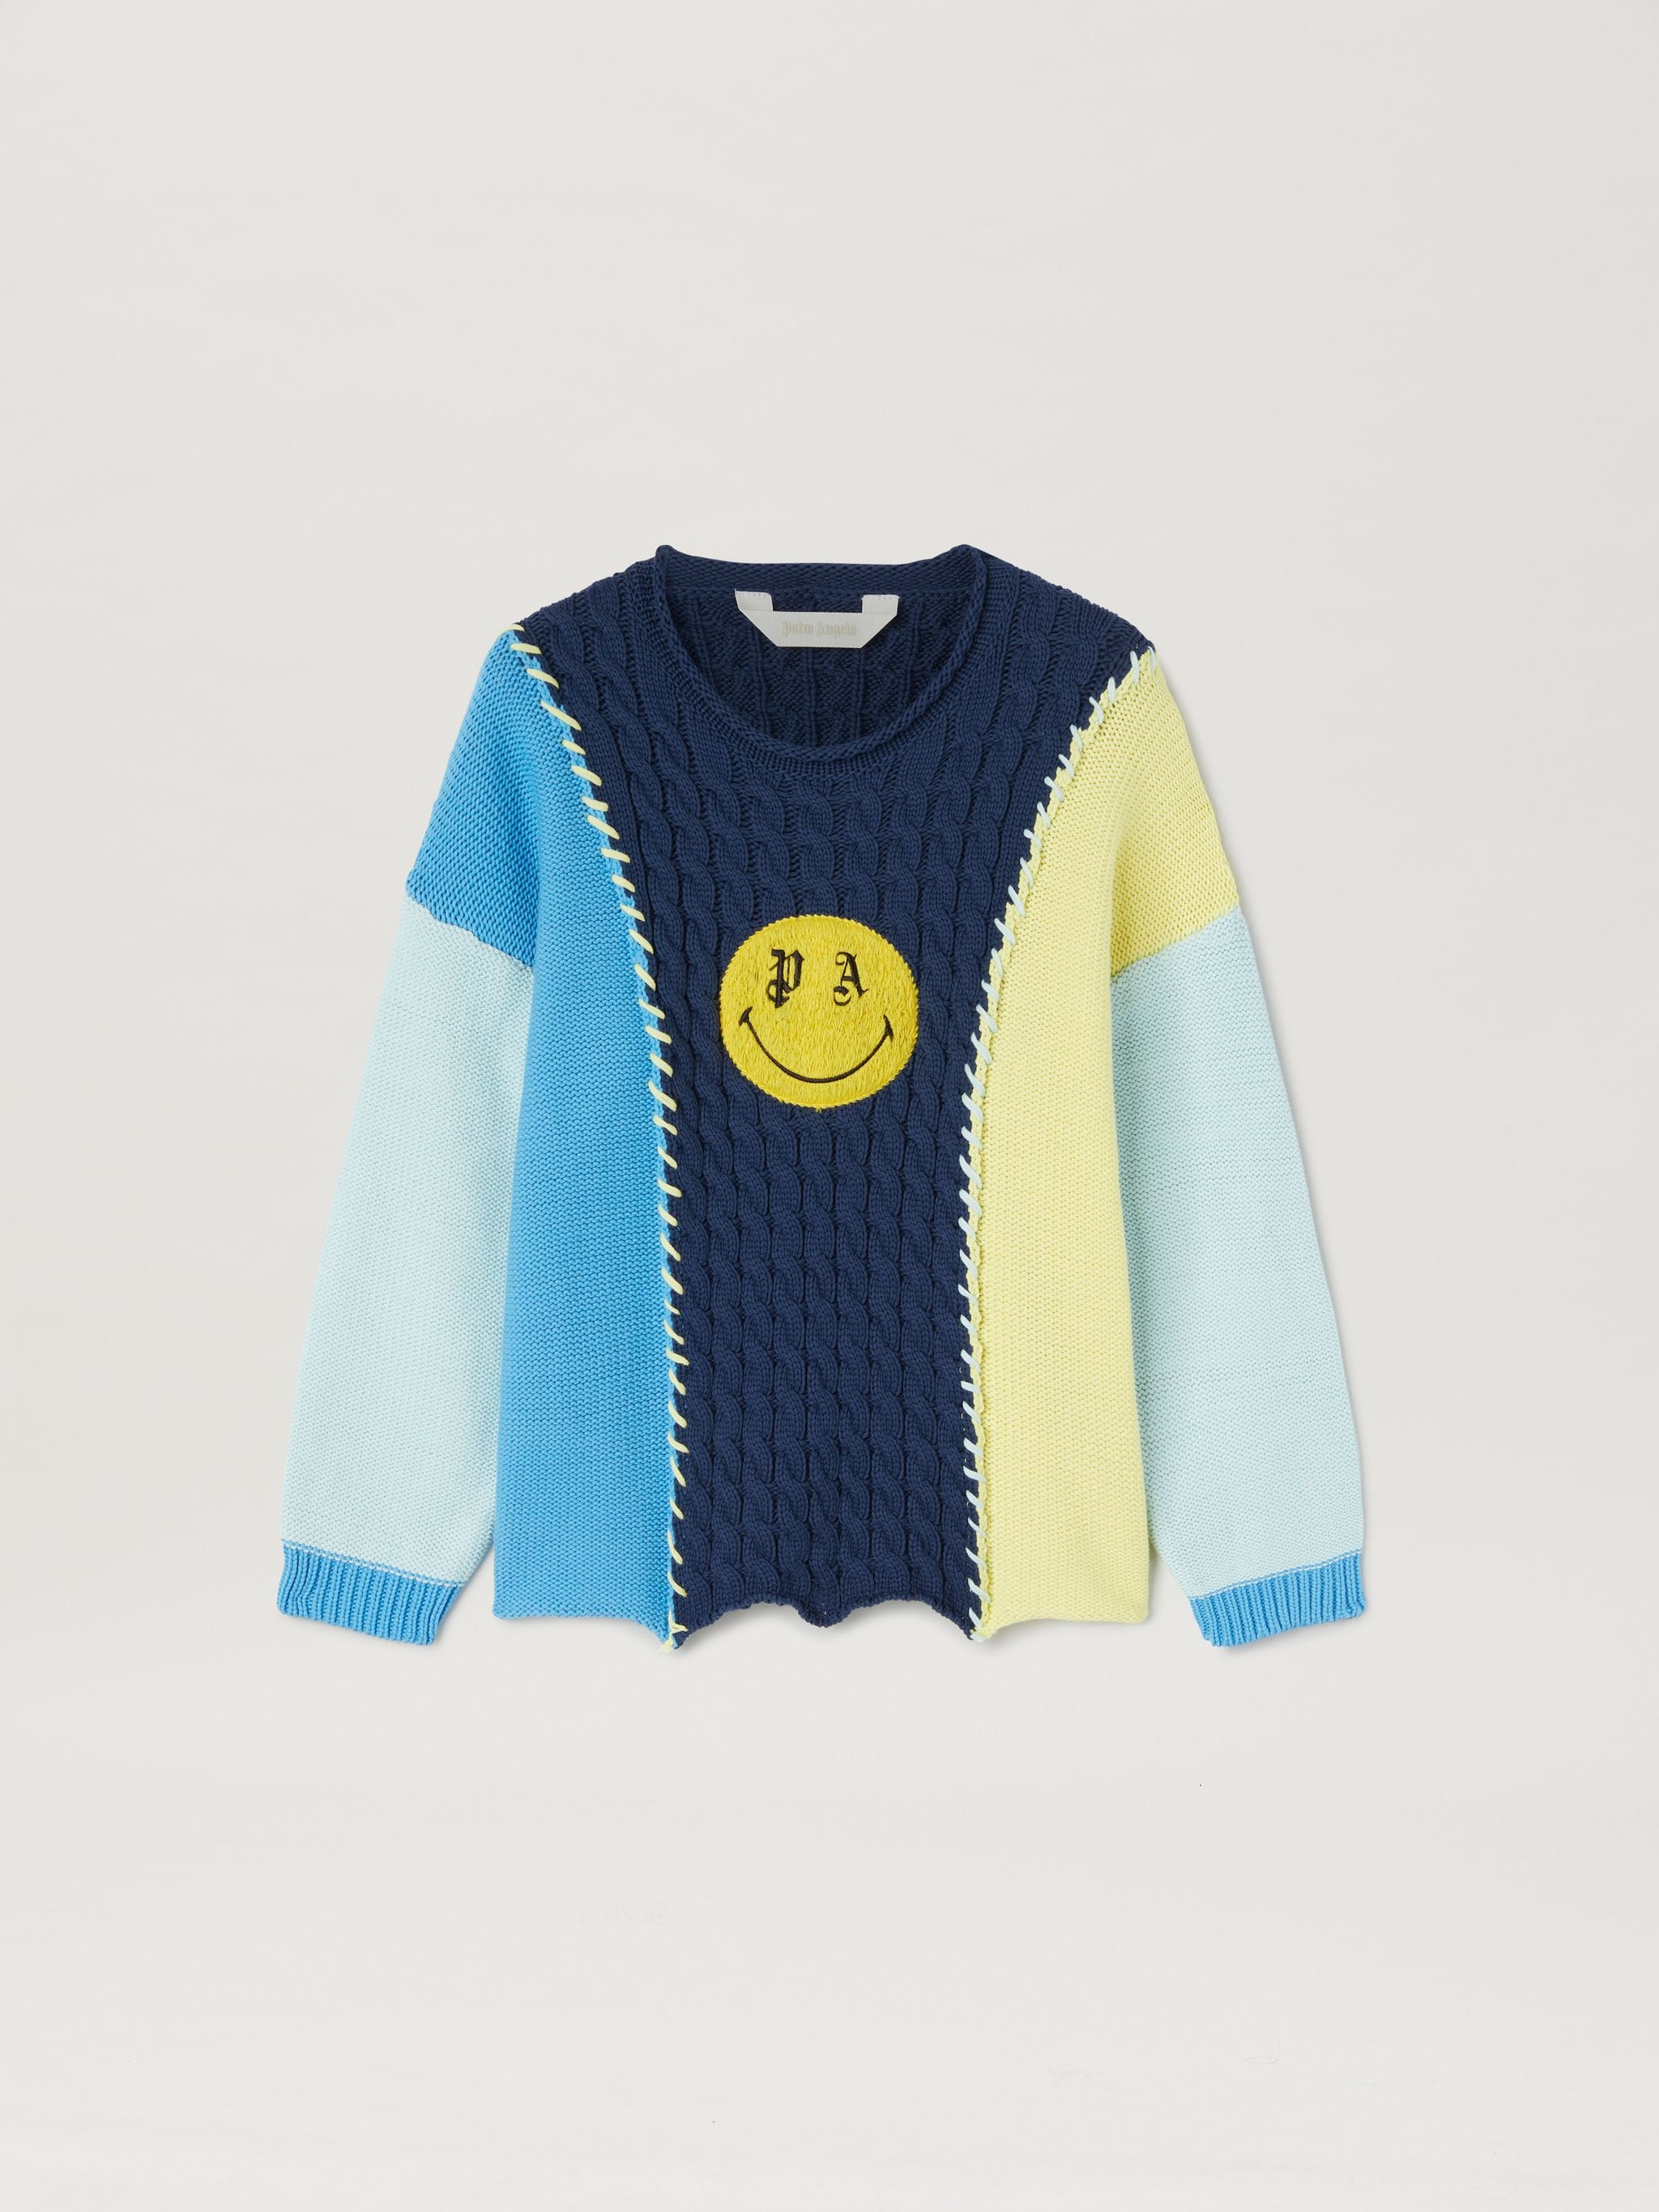 PA SMILEY PATCHWORK KNIT CREW